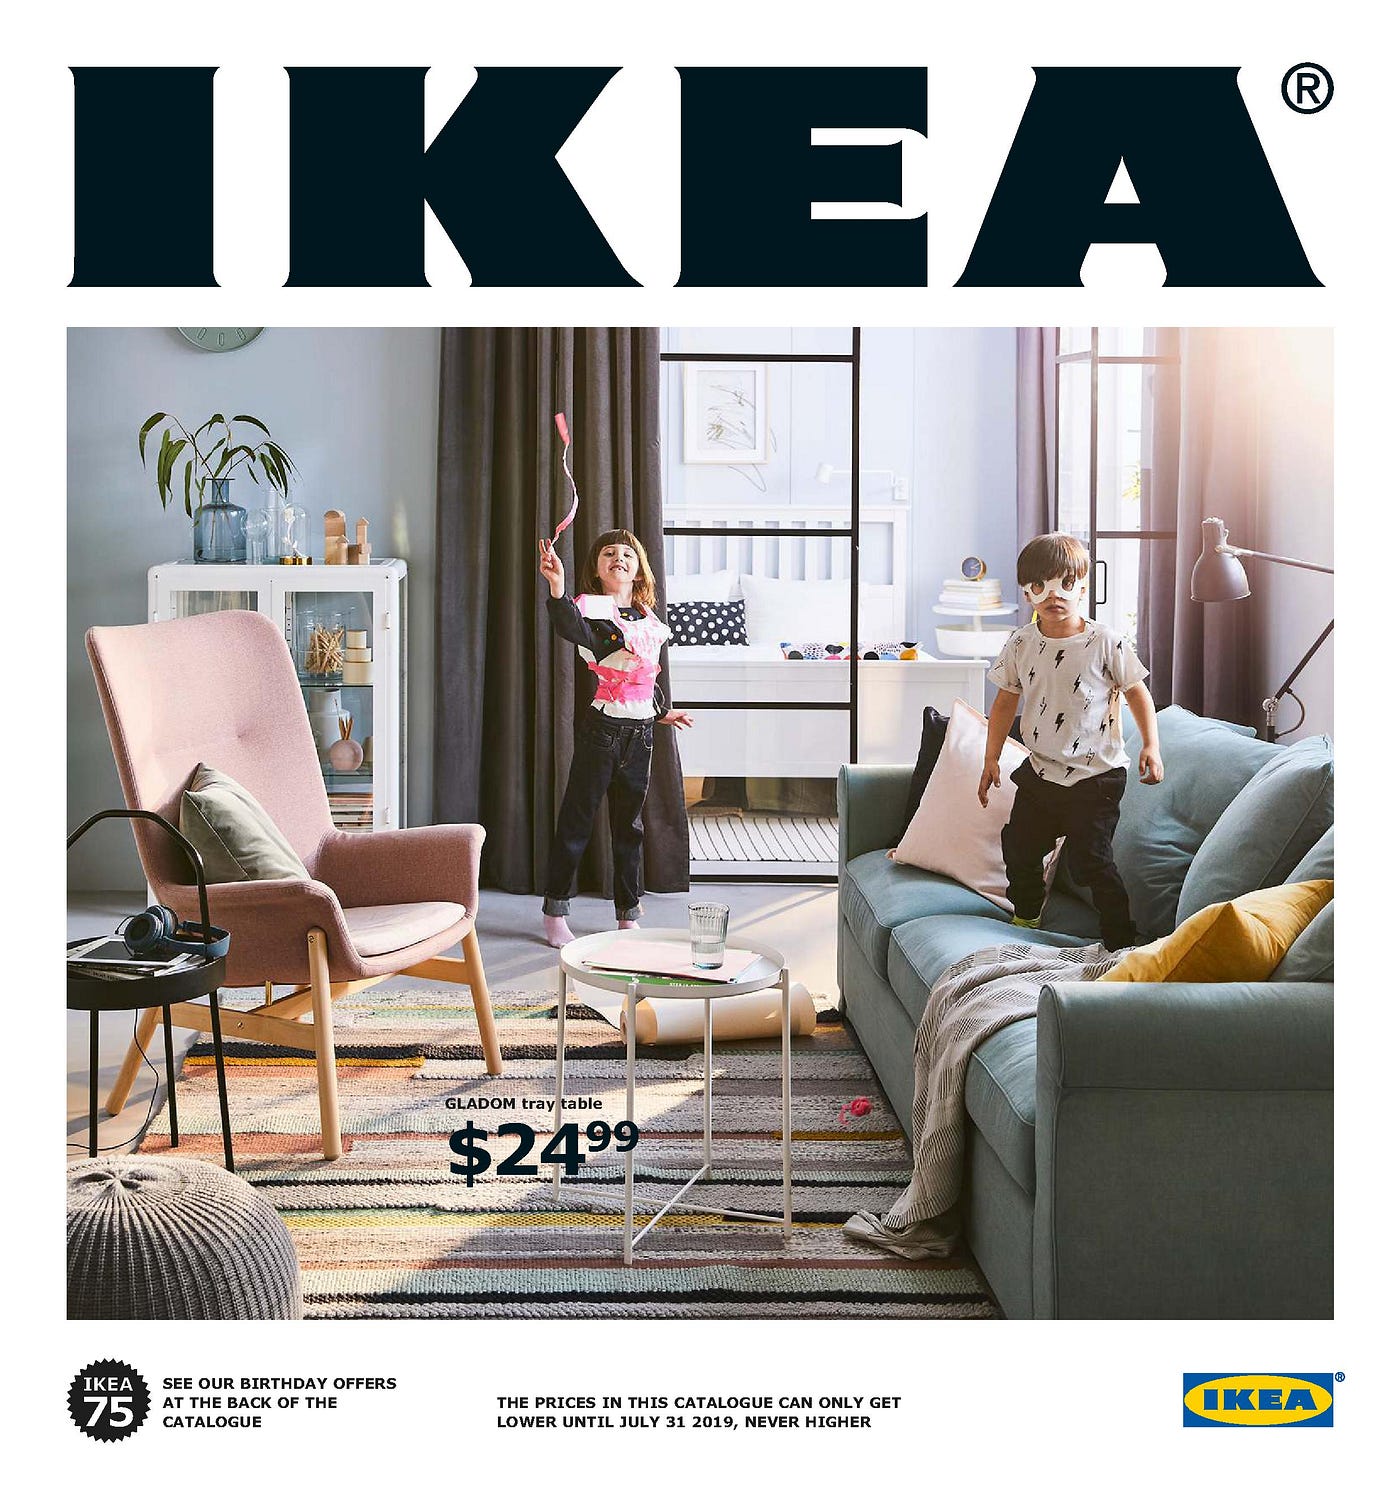 How IKEA Allows Us to Dream: Reviewing the 2019 IKEA Canada Catalogue | by  Jane Zhang | Prototypr